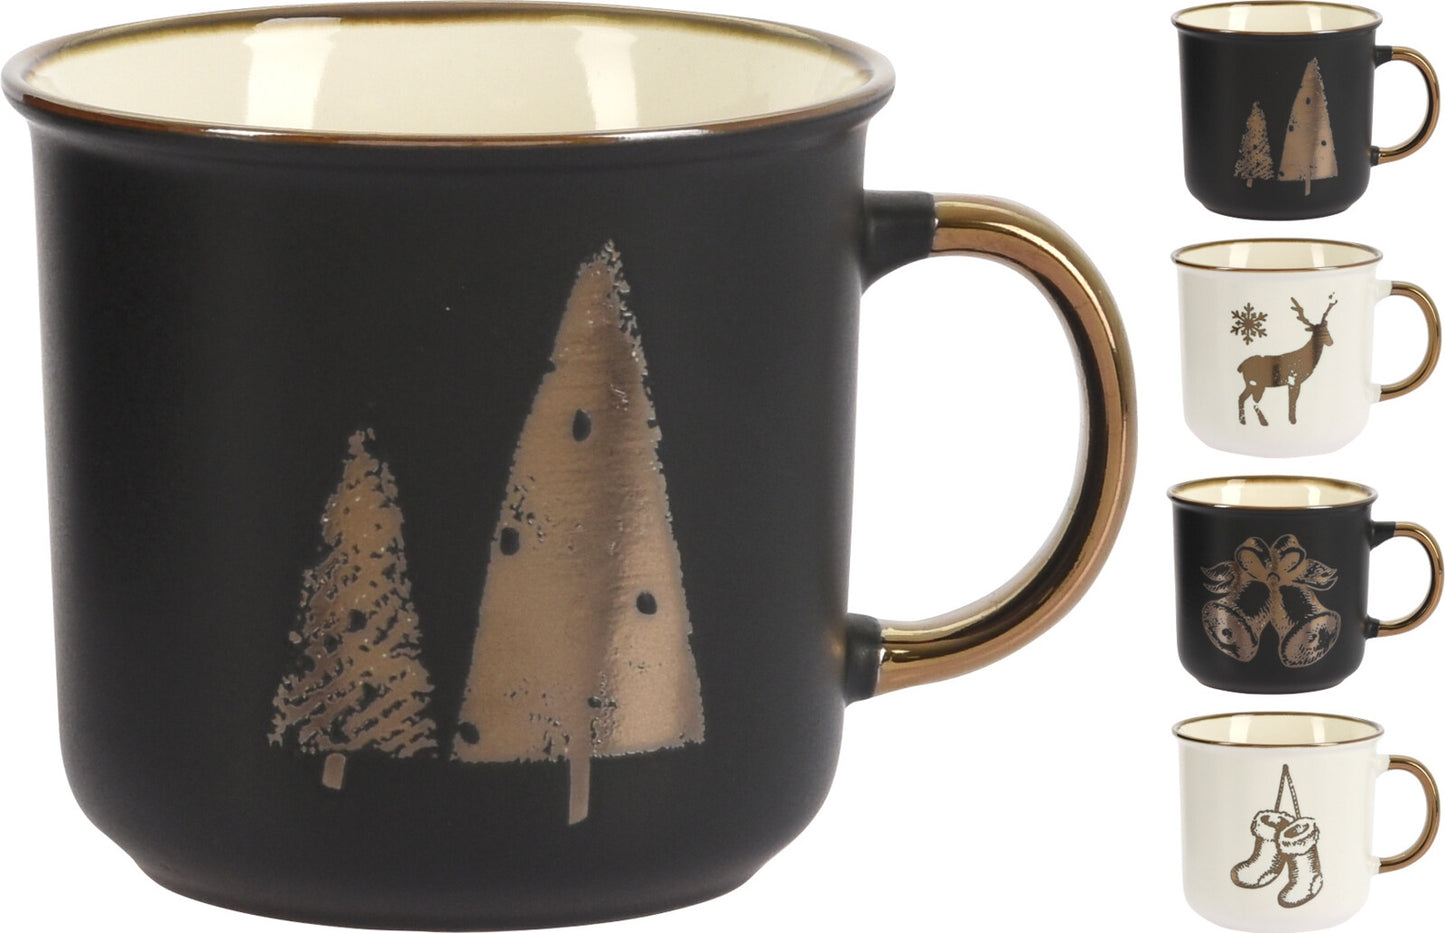 Bone Mugs with Metallic Holiday Accents